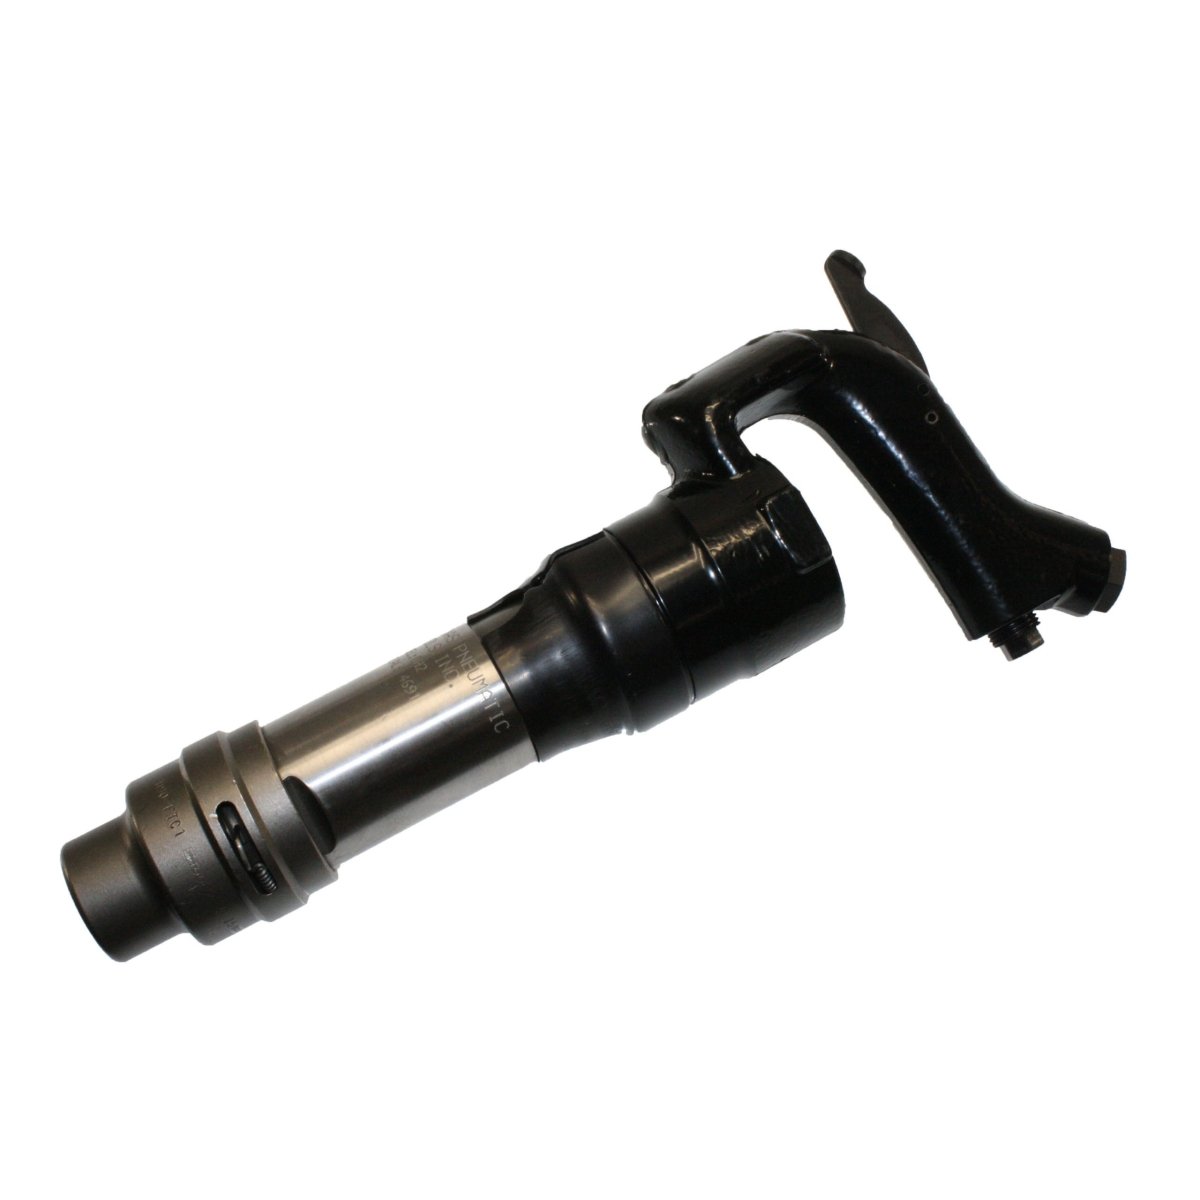 TX-CH4-R - 4" Stroke Chipping Hammer w/ Round Bushing & Forged Handle - Texas Pneumatic Tools